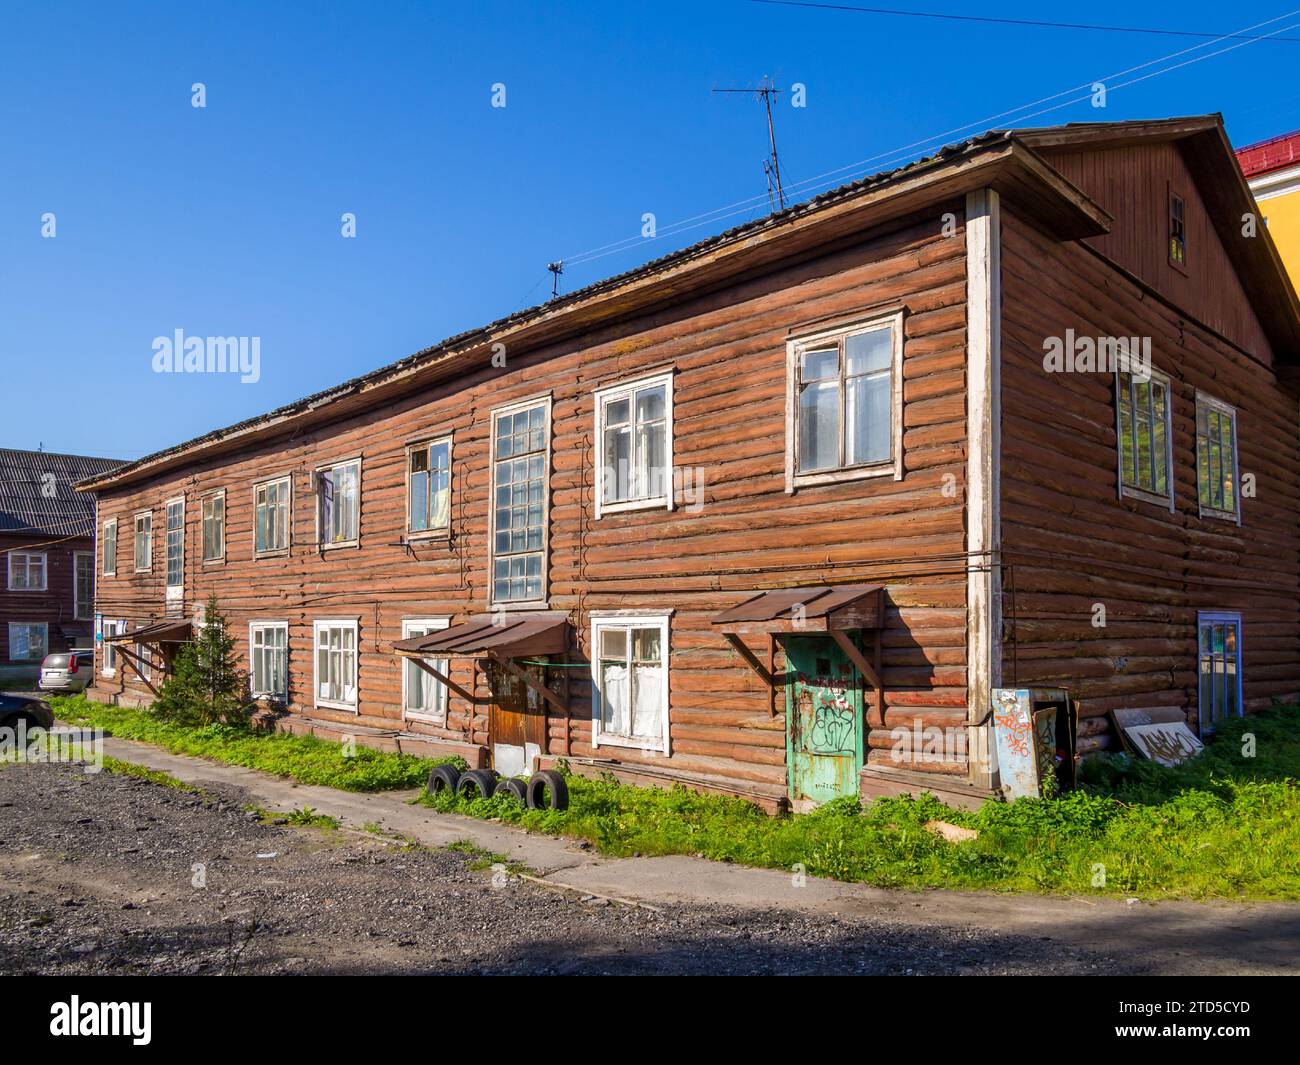 Murmansk, Russia - August 09, 2021: Old log house in one of the districts of Murmansk Stock Photo